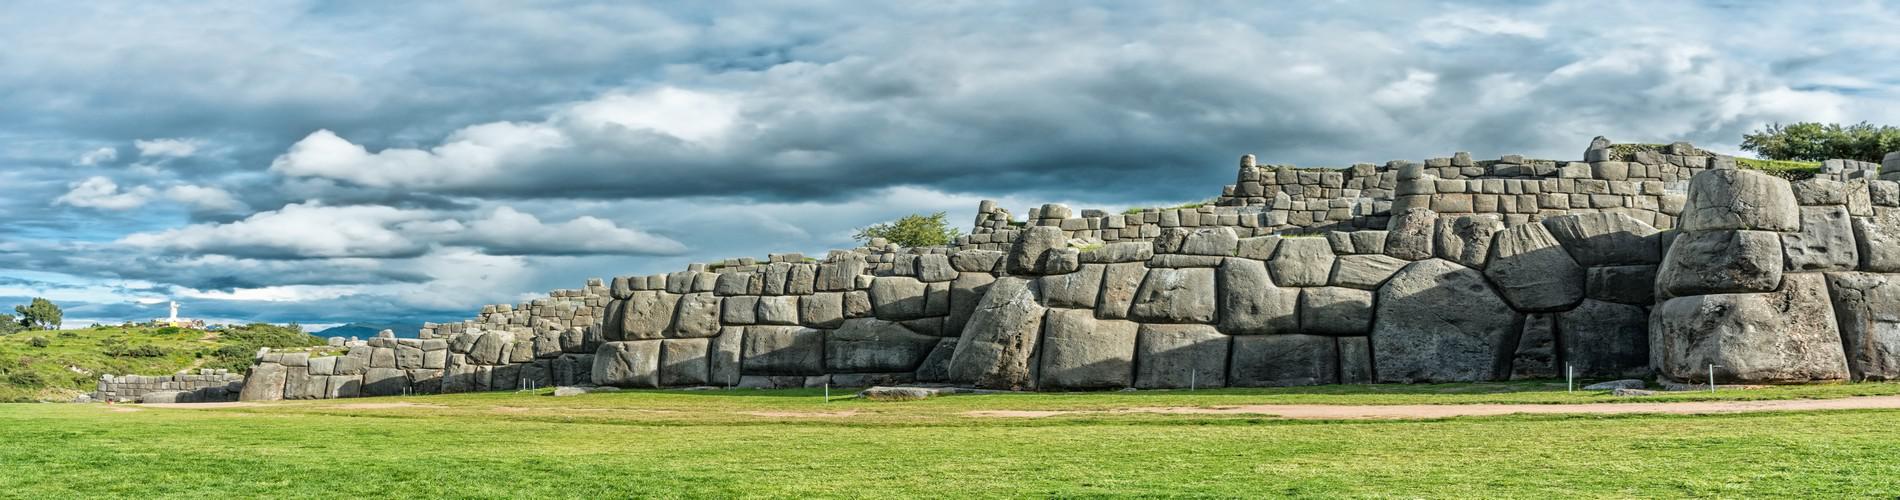 Incredible Peruvian Archaeological sites